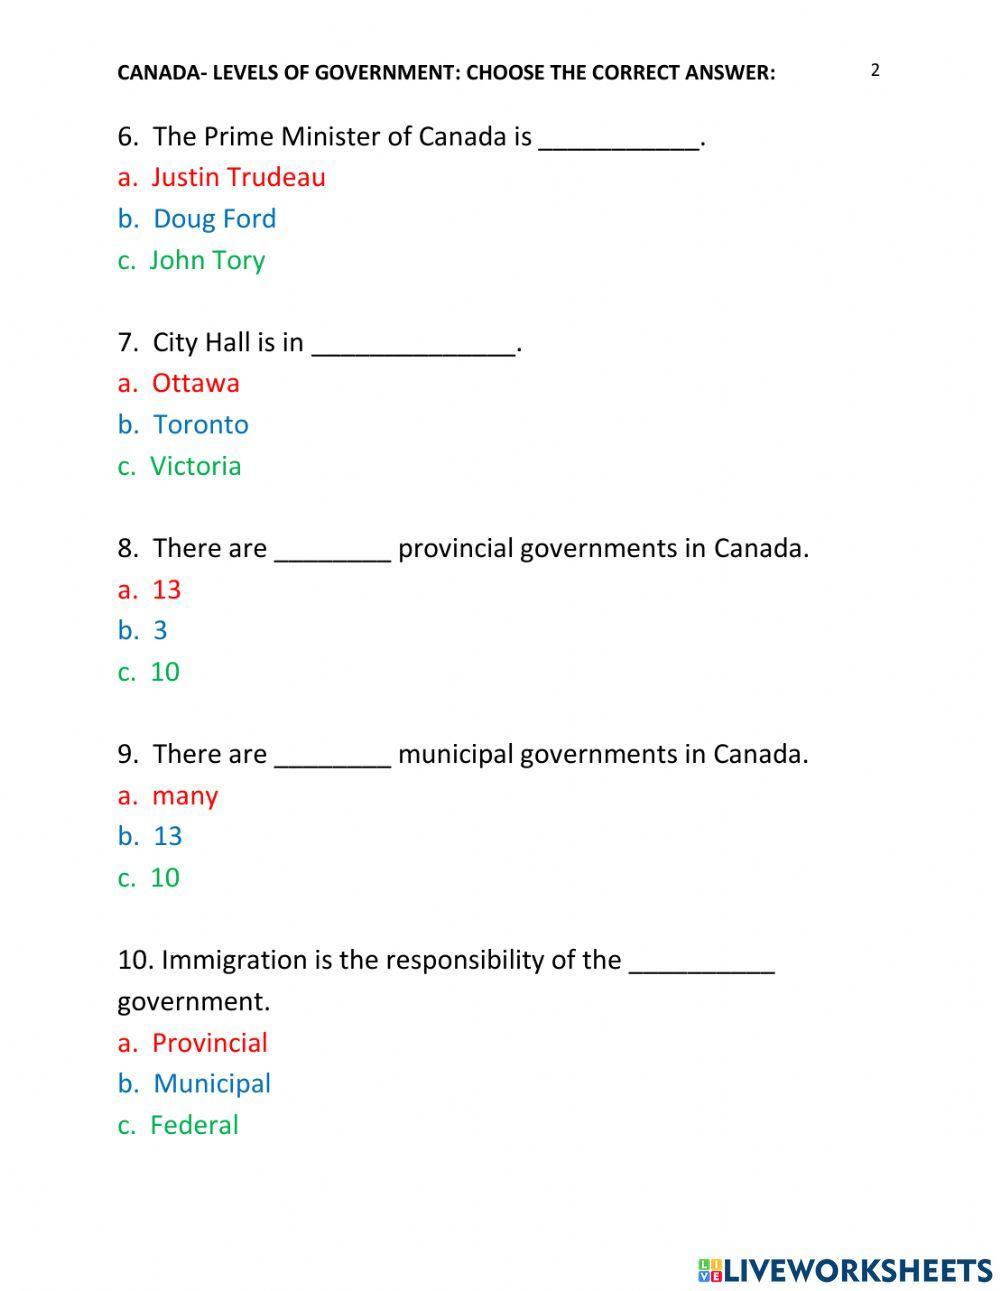 Canada - Levels of Government- multiple choice